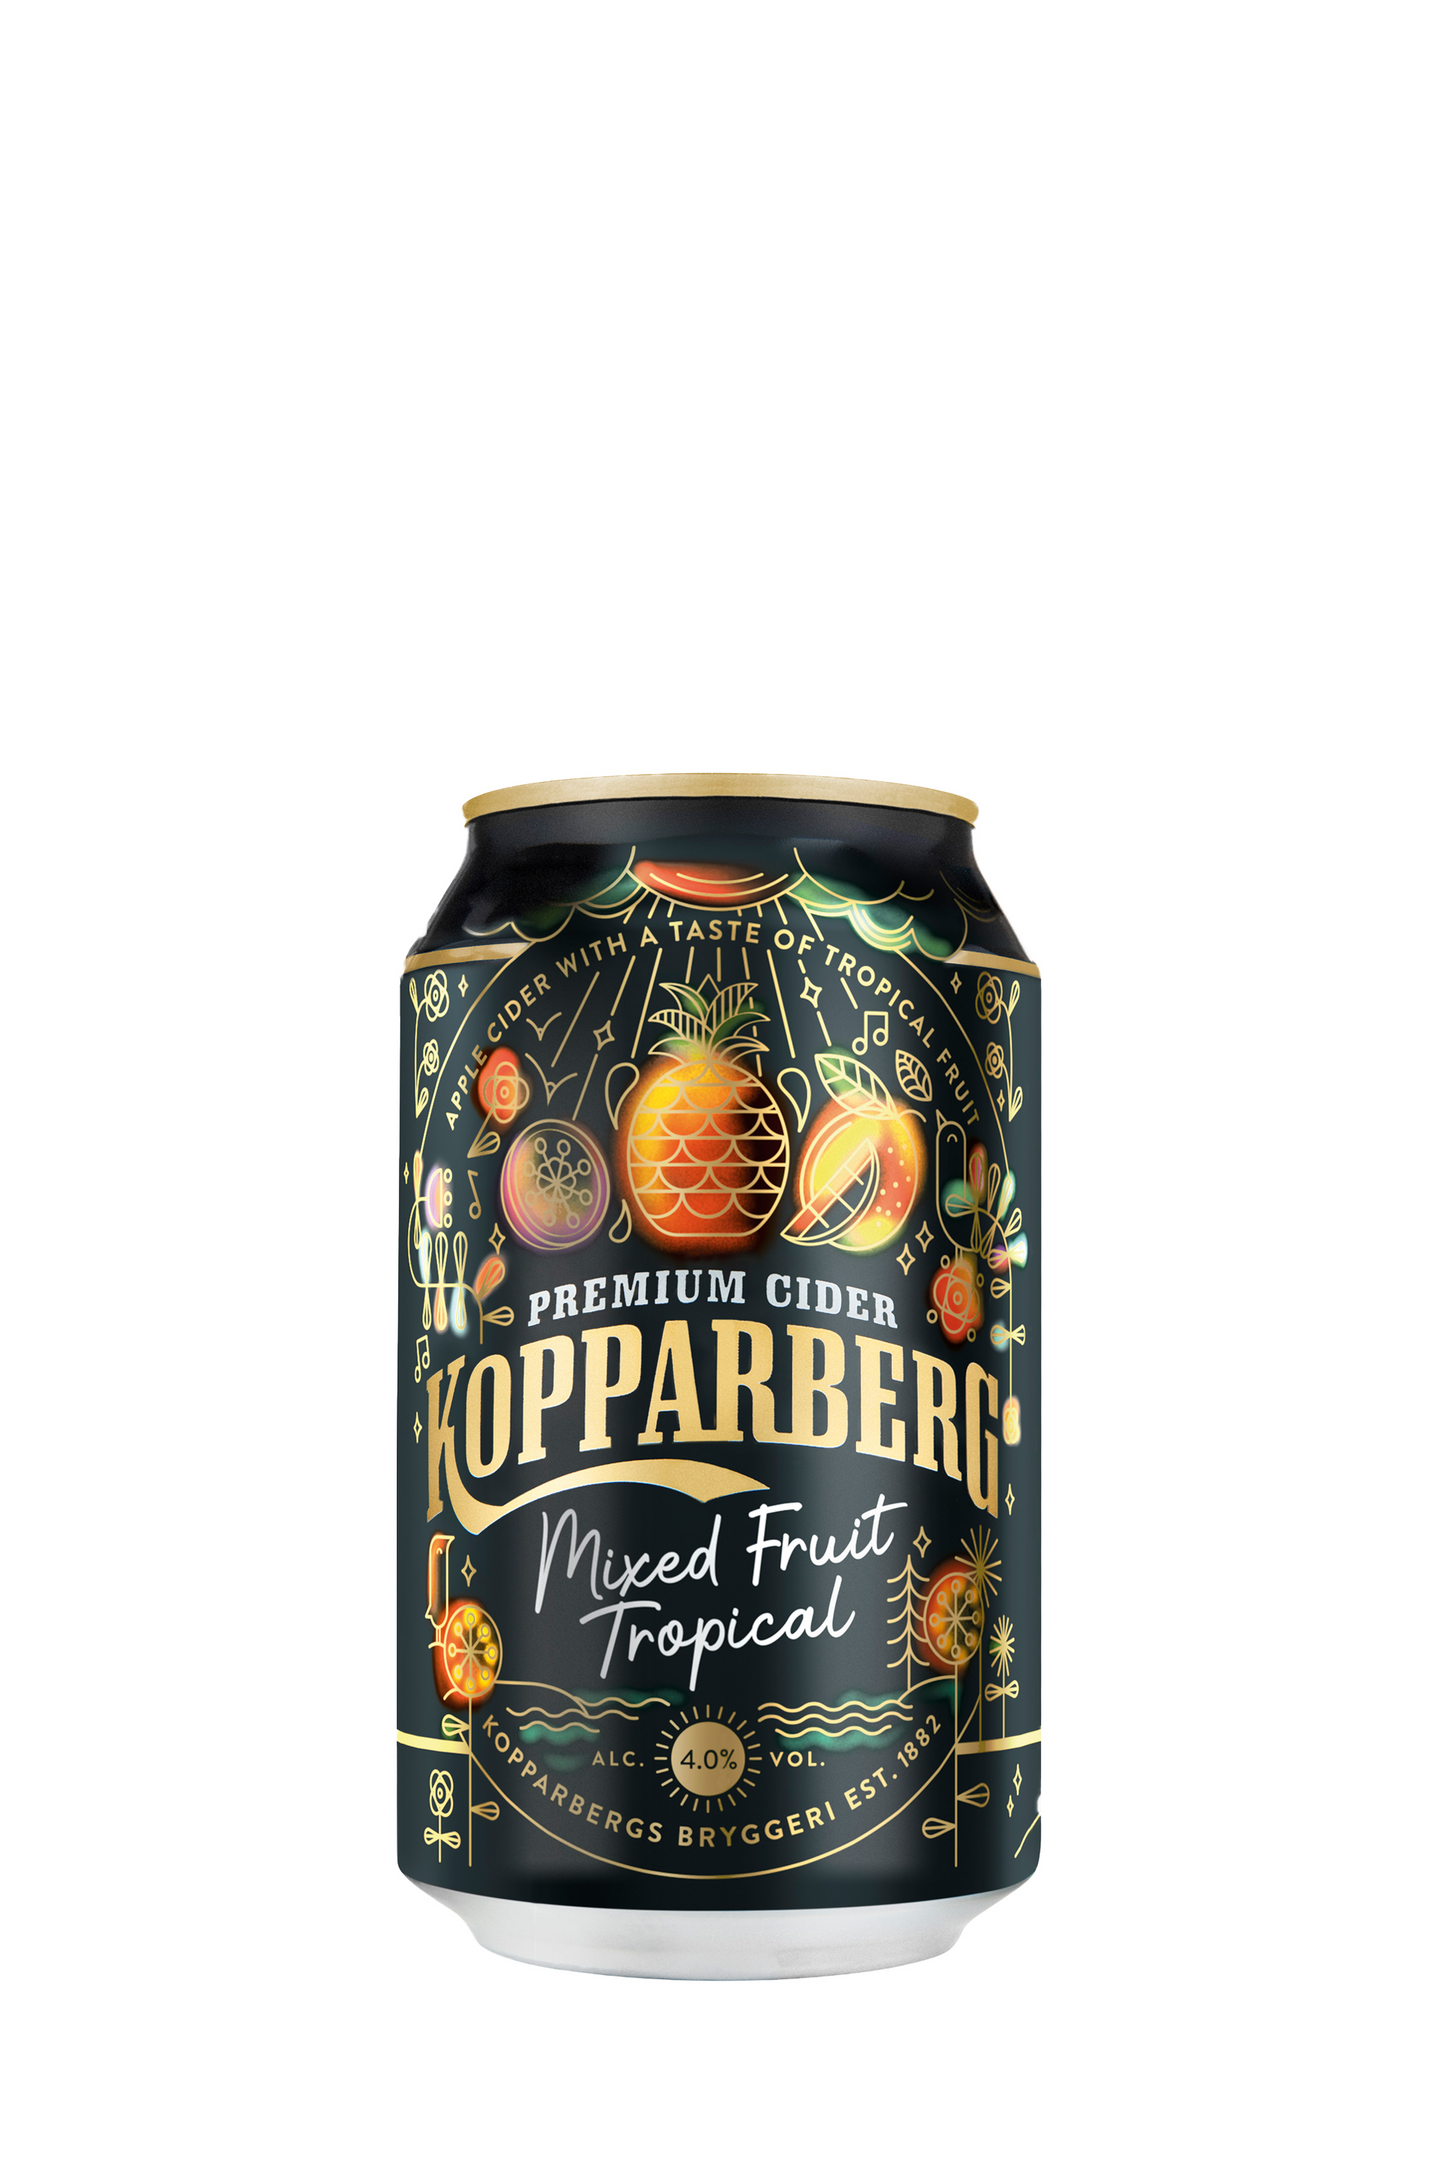 Kopparberg Mixed Fruit Tropical siideri 4,0% 0,33l DOLLY